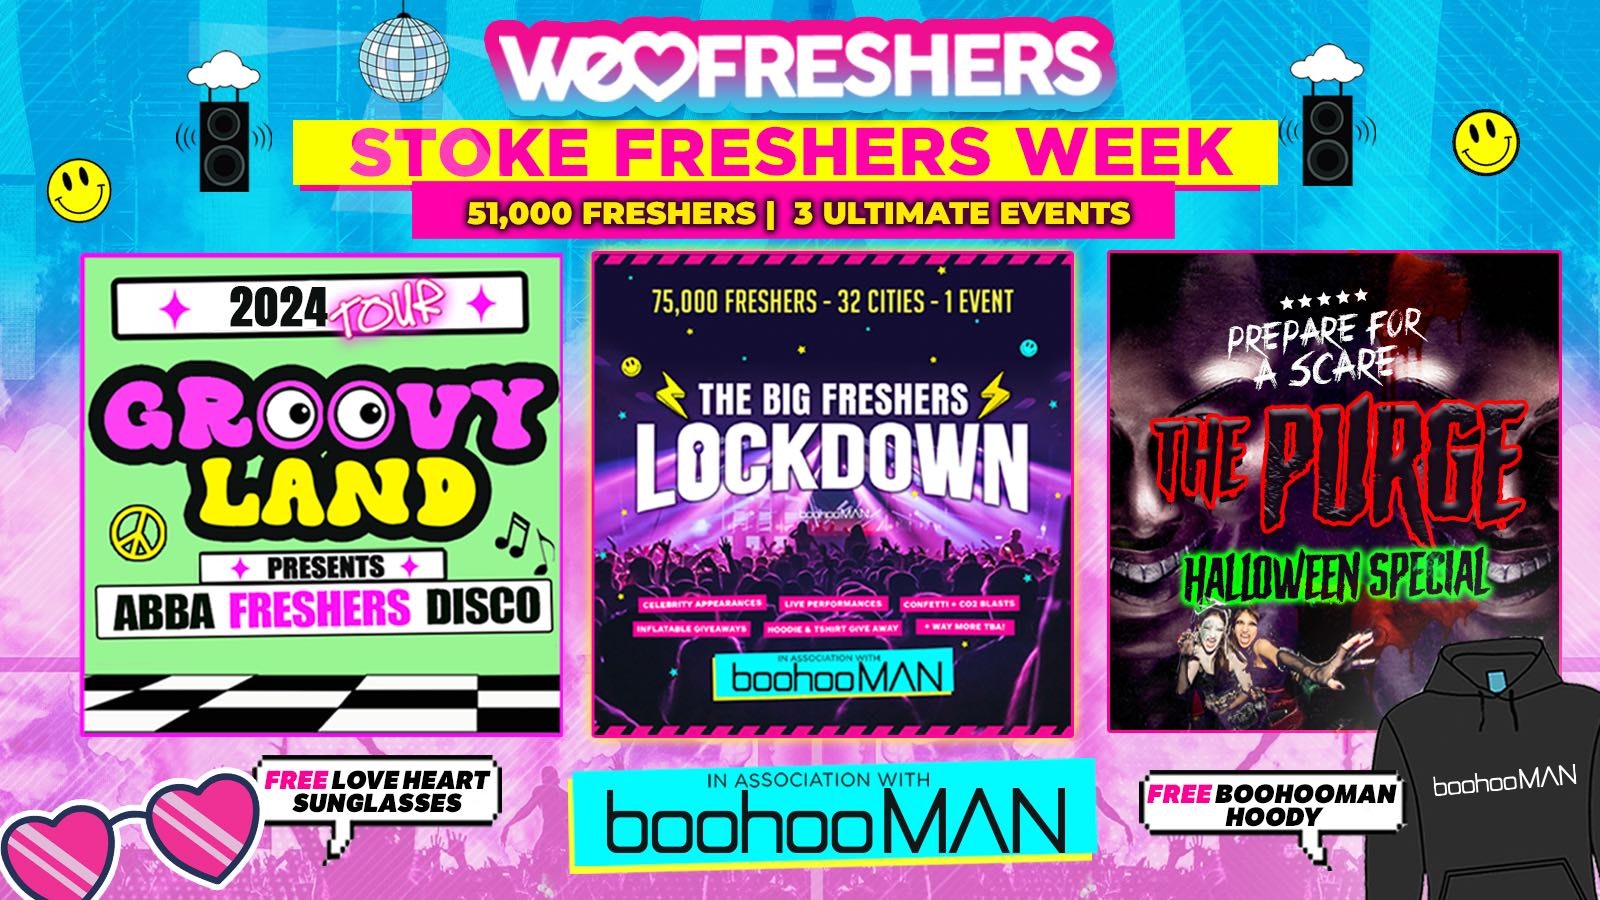 WE LOVE STOKE FRESHERS 2024 in association with boohooMAN ❗FREE BOOHOOMAN HOODIE TODAY ONLY❗